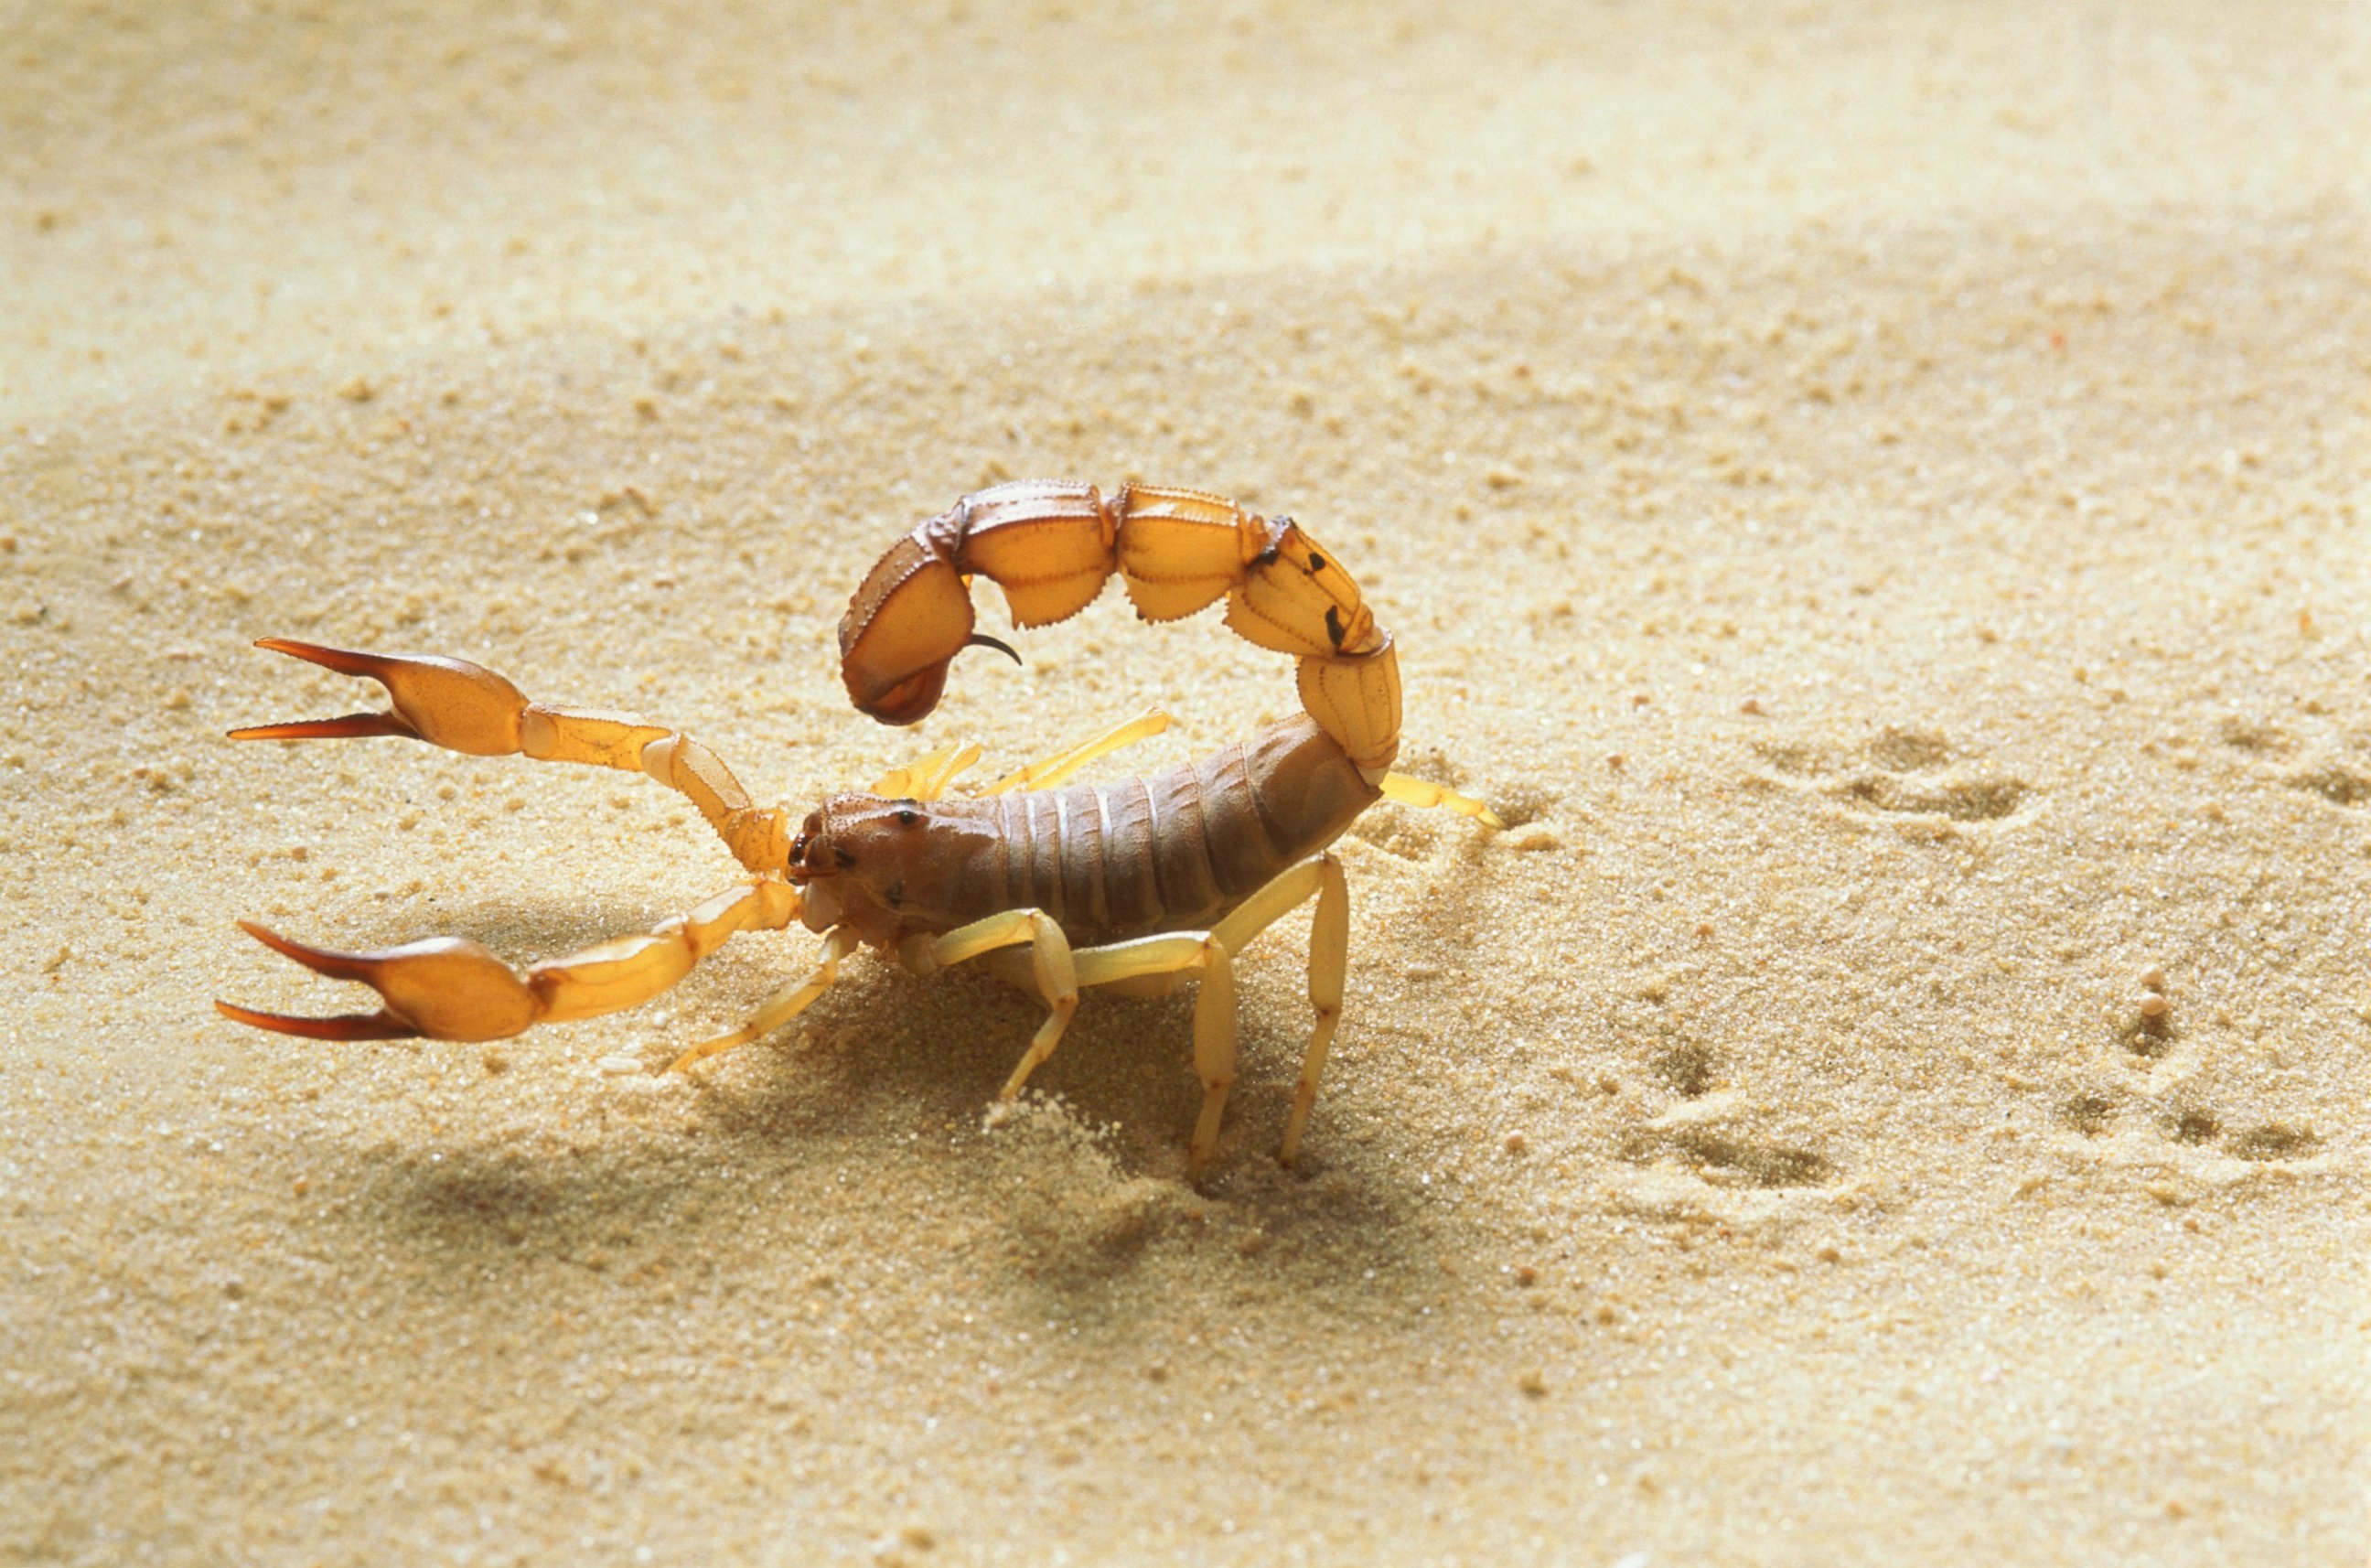 PHOTO: A yellow fat tail scorpion is seen close-up in this stock image.